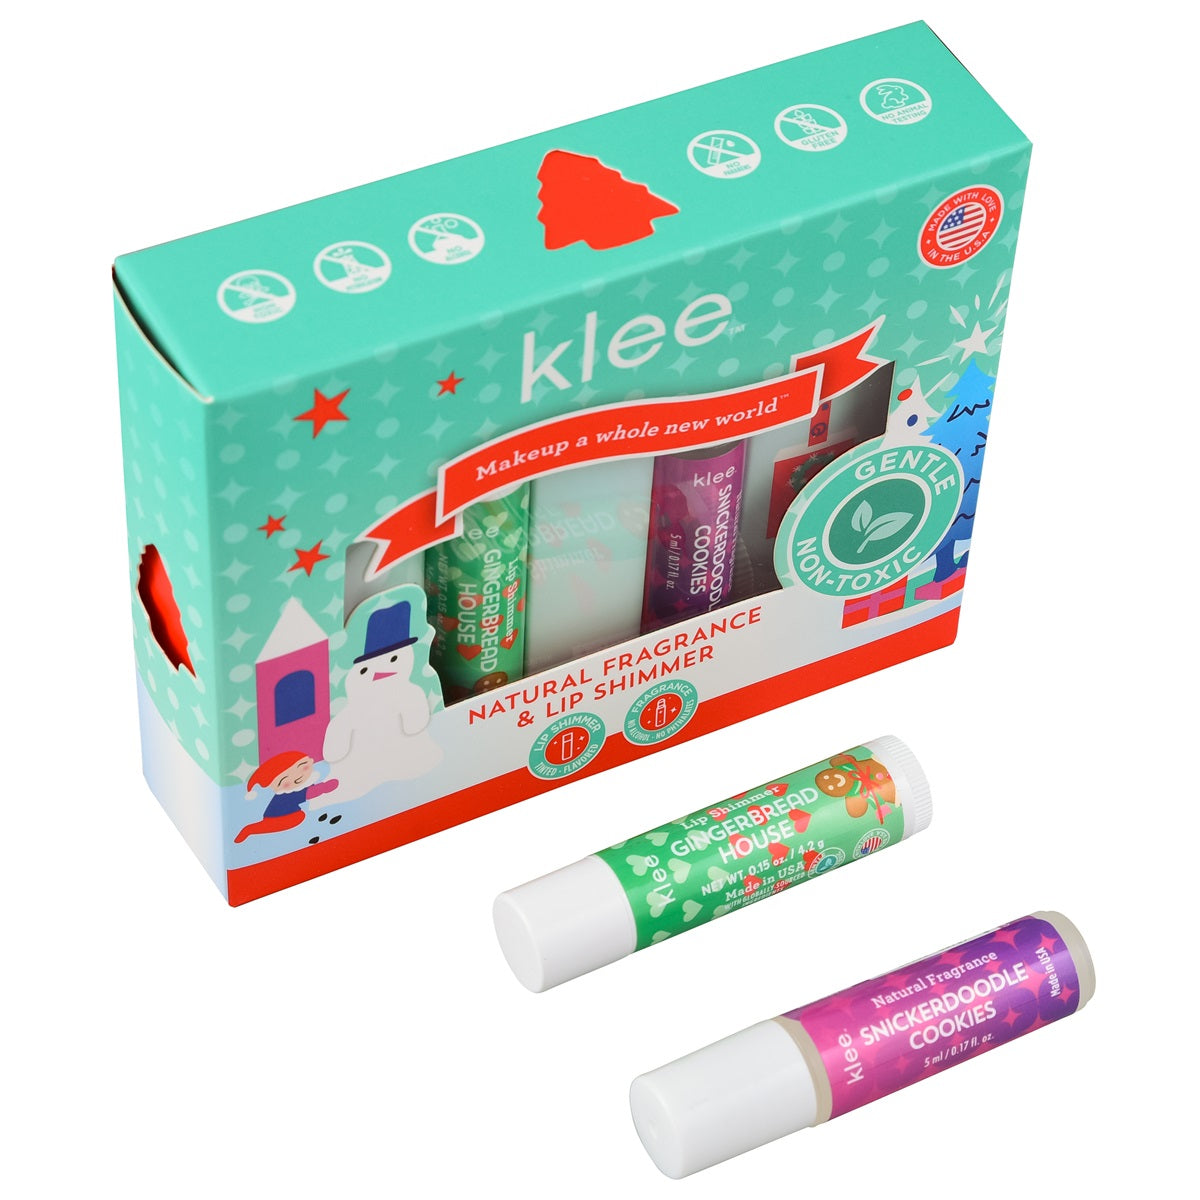 Klee Naturals - Xmas Edition - Natural Lip Shimmer &amp; Natural Fragrance Duo 聖誕版 - 天然閃色唇蜜 + 天然香水組合 (Snickerdoodle Cookies)